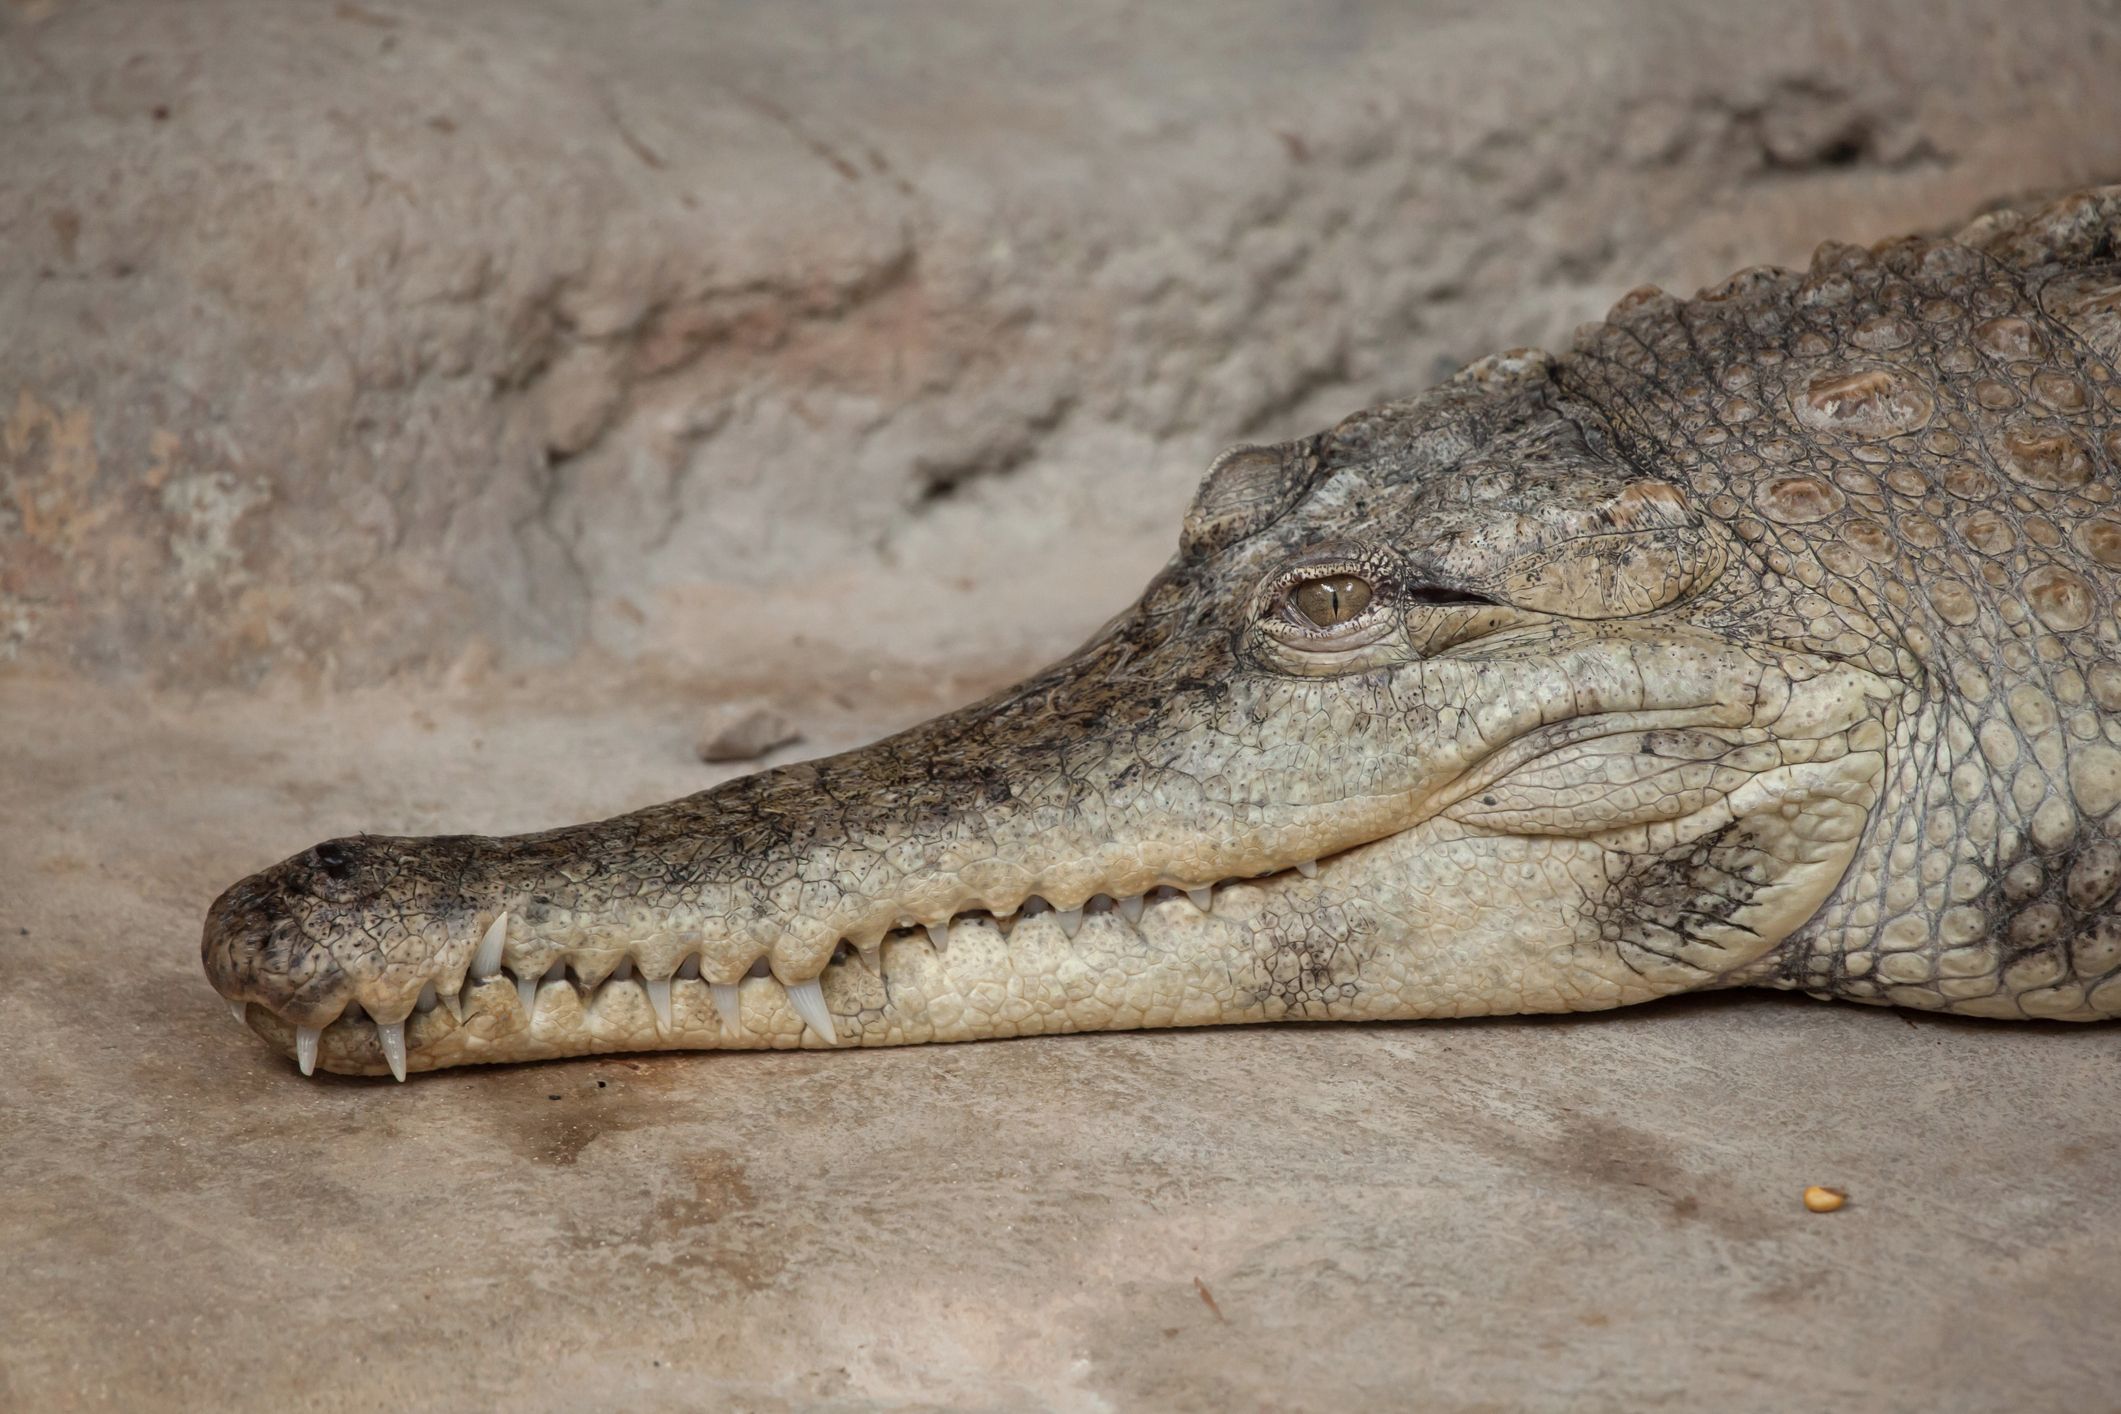 Entirely New Species of Crocodile Has Been Discovered—And It's Got Soft Skin